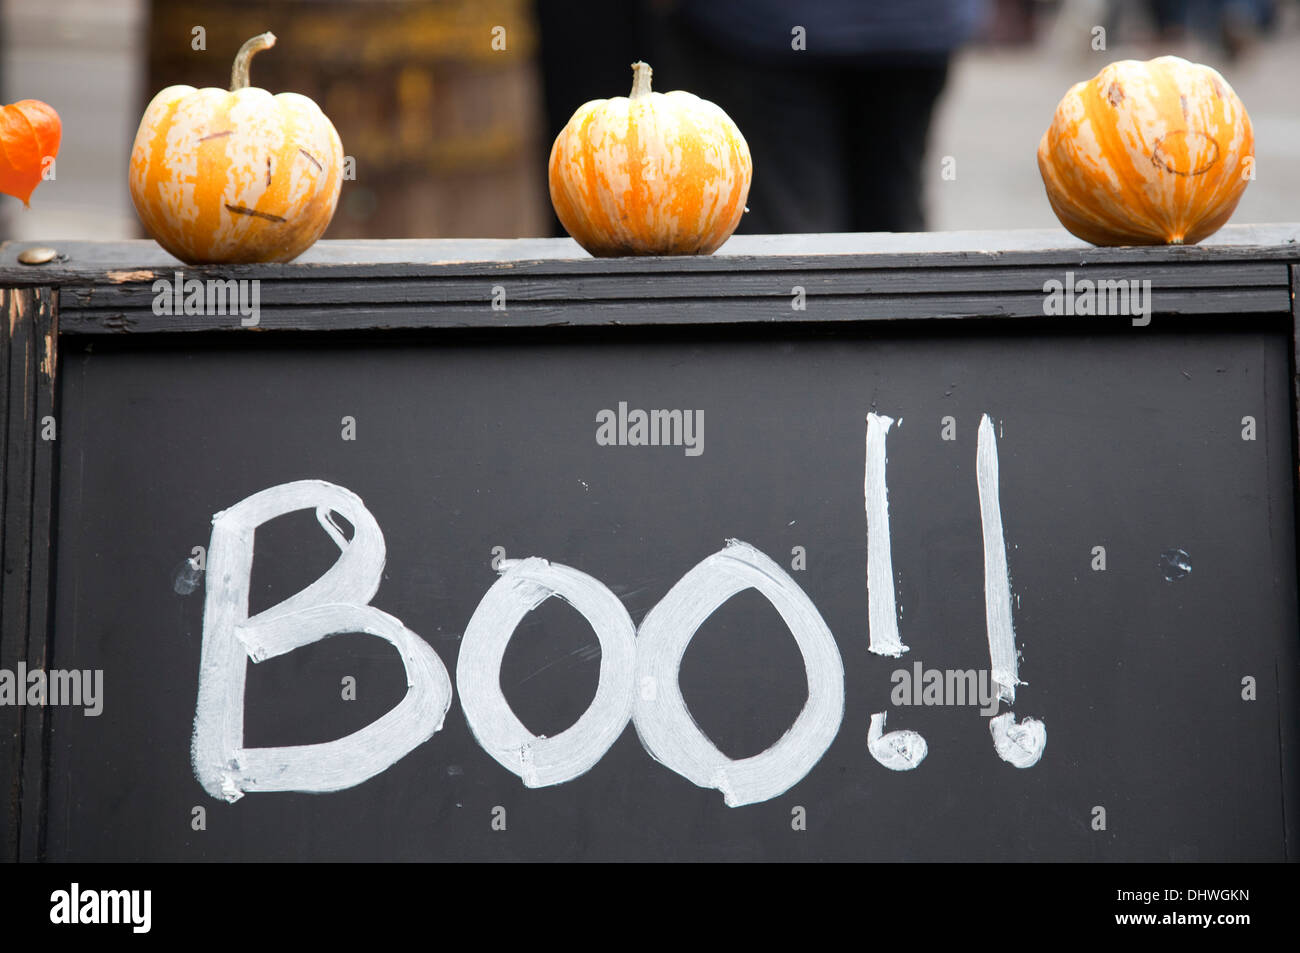 Boo! Halloween Sign with Pumpkins Stock Photo